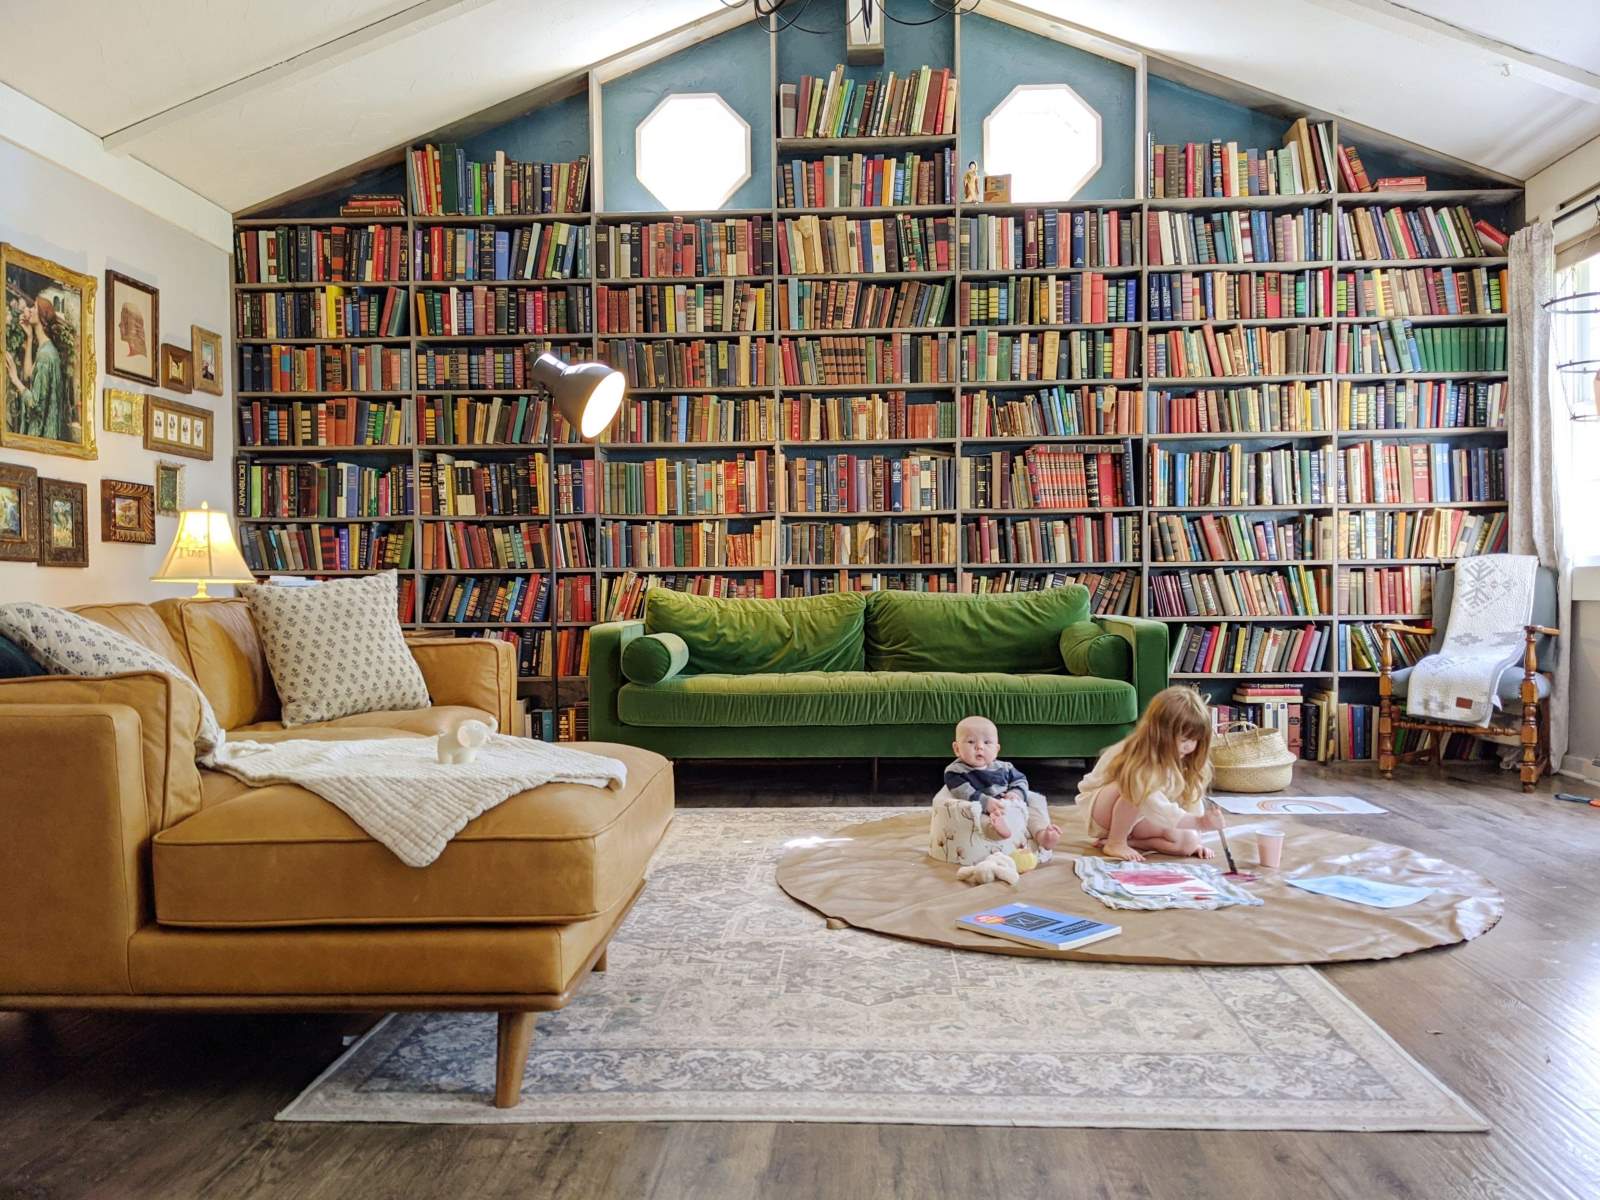 Building Your Dream Library: DIY Home Improvement Ideas For Creating The Perfect Personal Reading Space